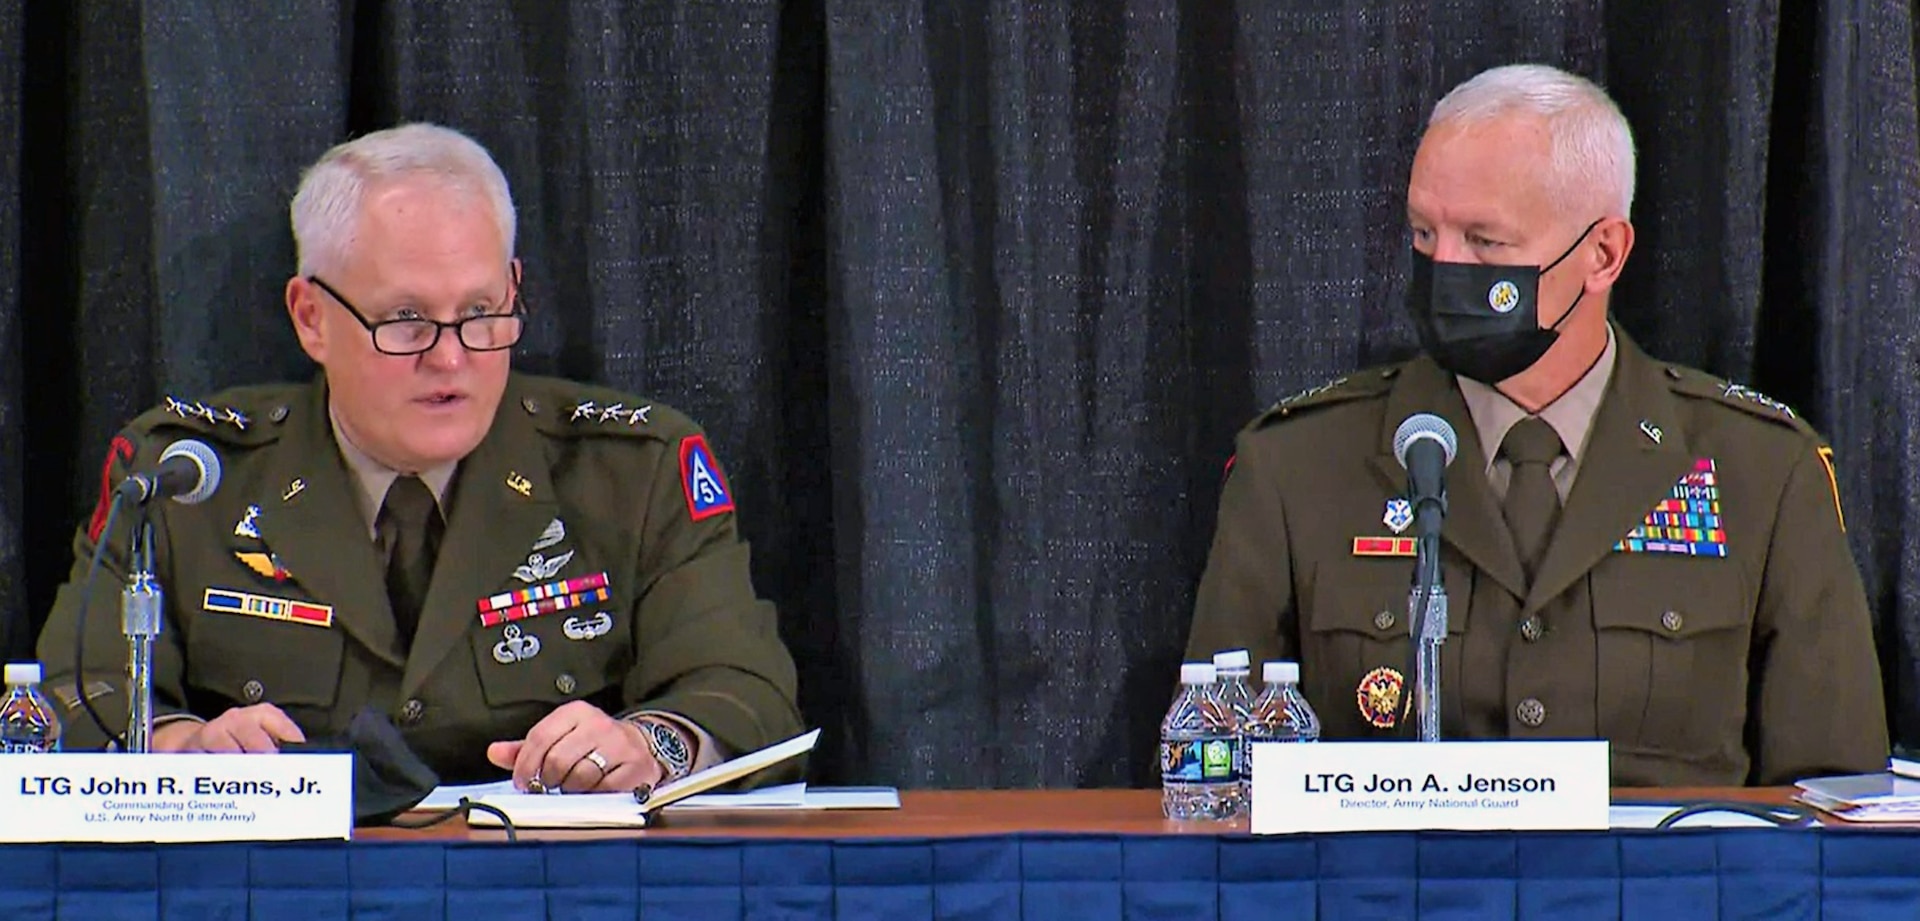 Lt. Gen. John R. Evans Jr. (left), commanding general for U.S Army North, speaks at the Enhancing National Resiliency panel during this year’s Association of the United States Army meeting